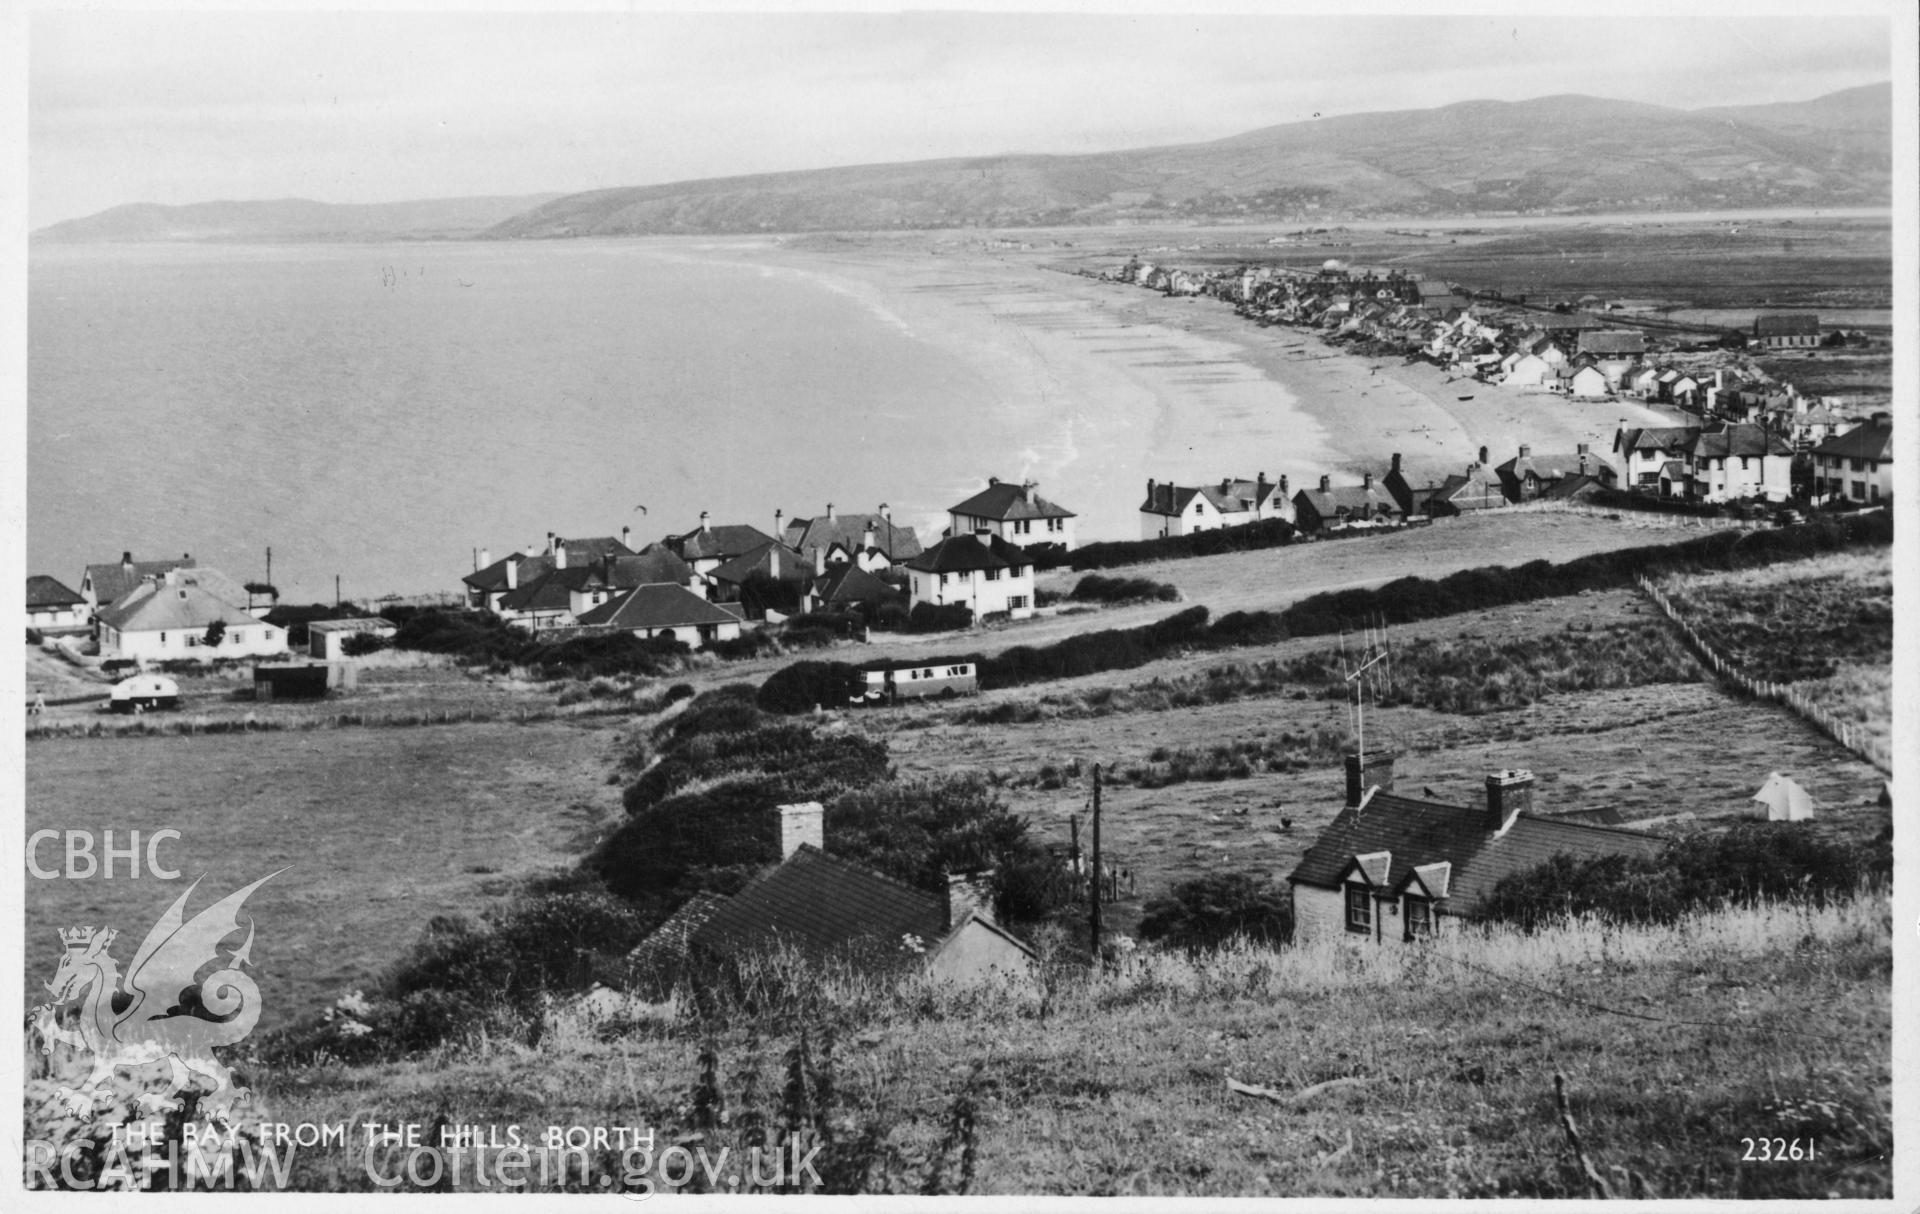 Digital copy of postcard showing The Bay from the Hills, Borth, dated 1958.(Publishers: Salmon postcards).  Loaned for copying by Charlie Downes.